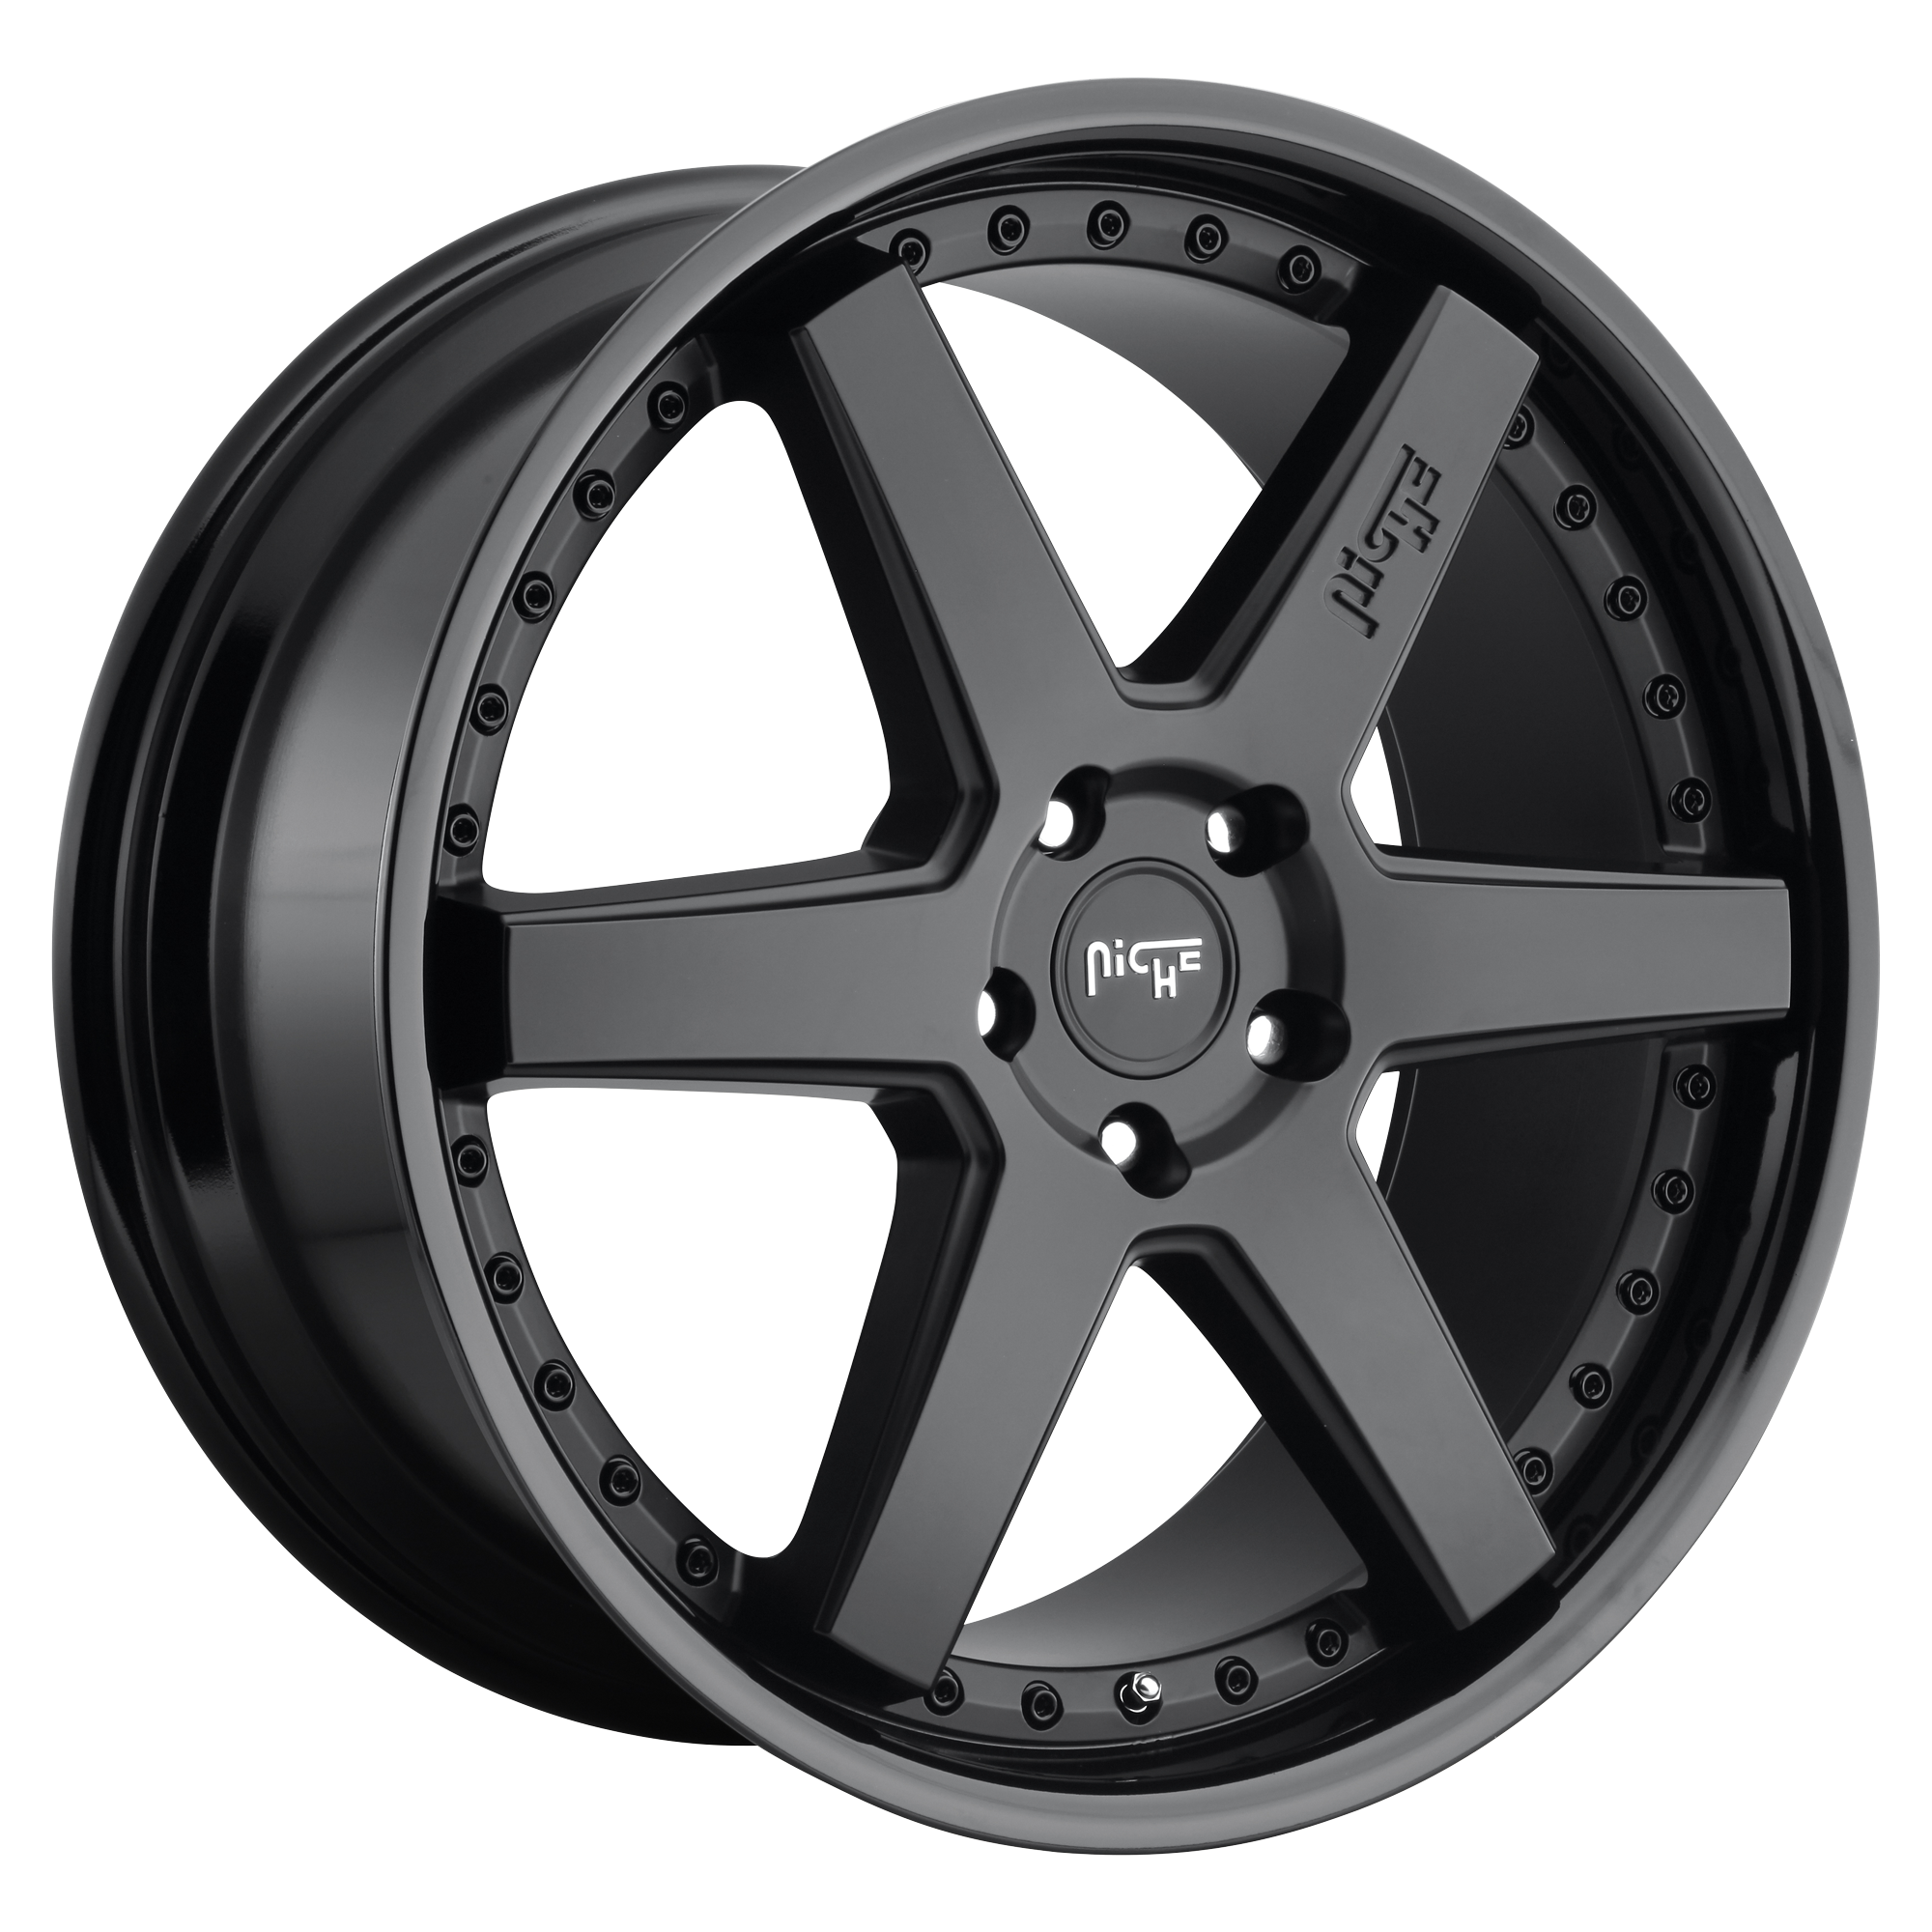 ALTAIR 18x8.5 5x120.00 GLOSS BLACK MATTE BLACK (35 mm) - Tires and Engine Performance